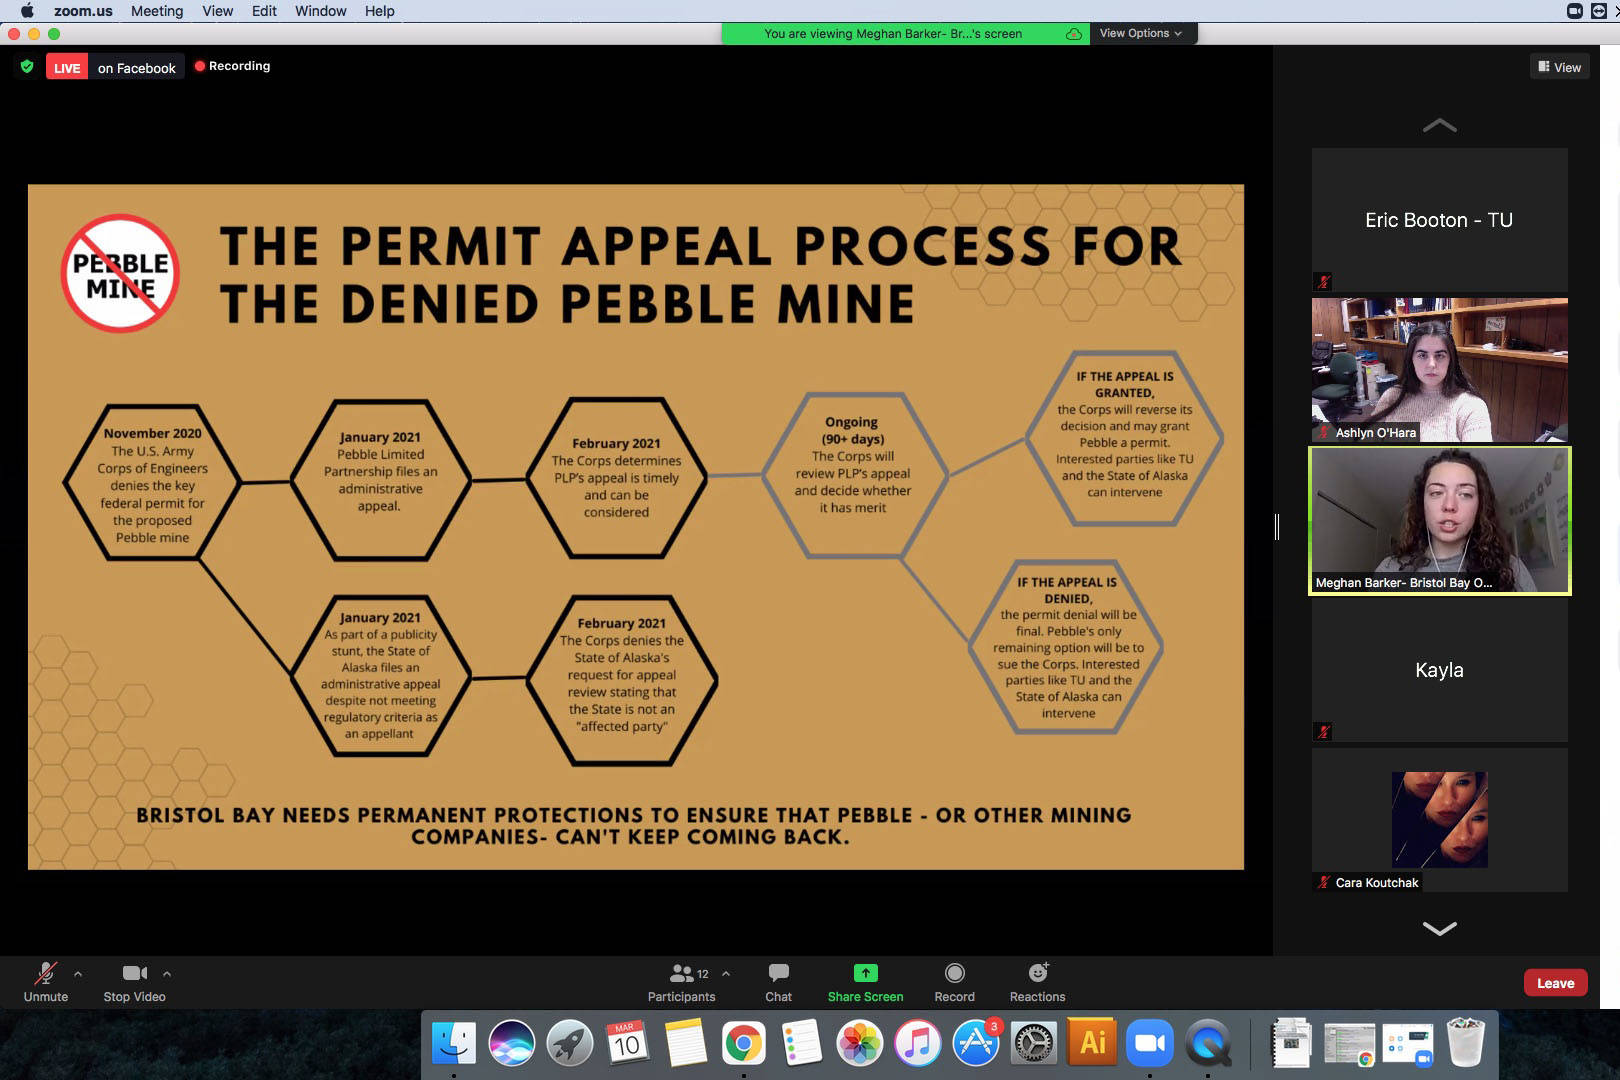 Meghan Barker presents information about Pebble Mine during a remote series on Wednesday, March 10, 2021. (Screenshot)